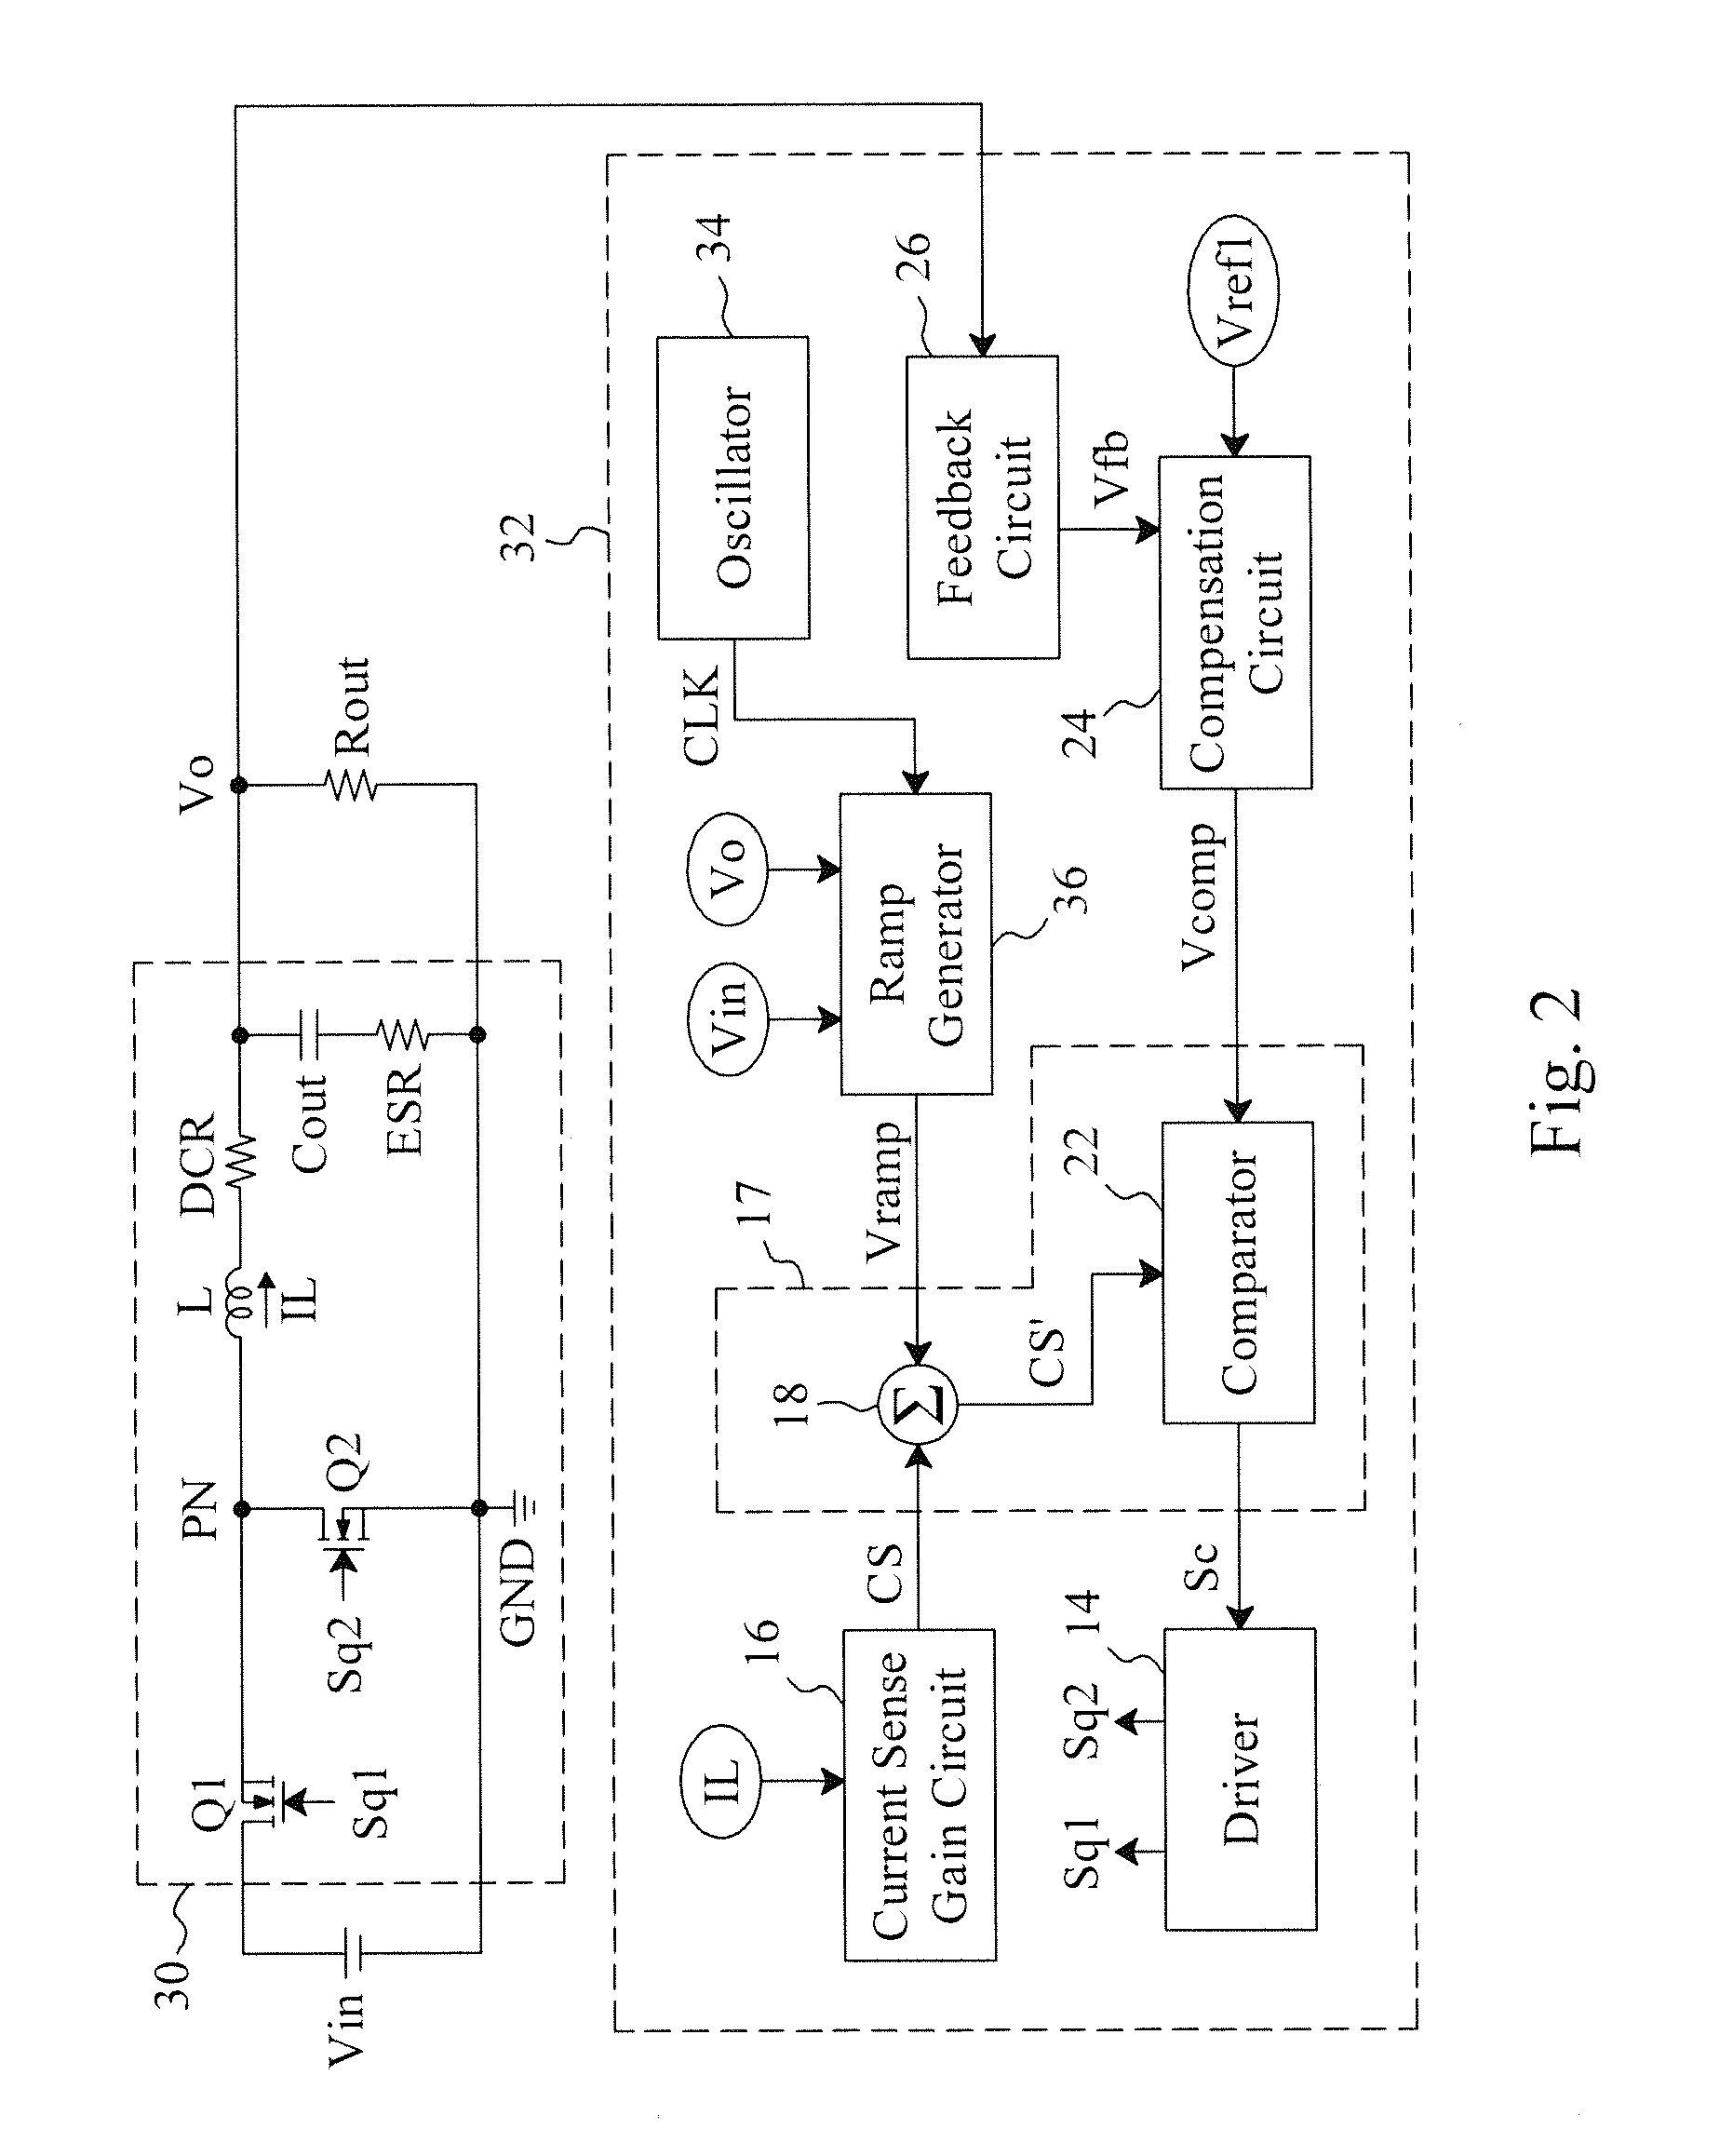 Control circuit and method for a current mode controlled power converter